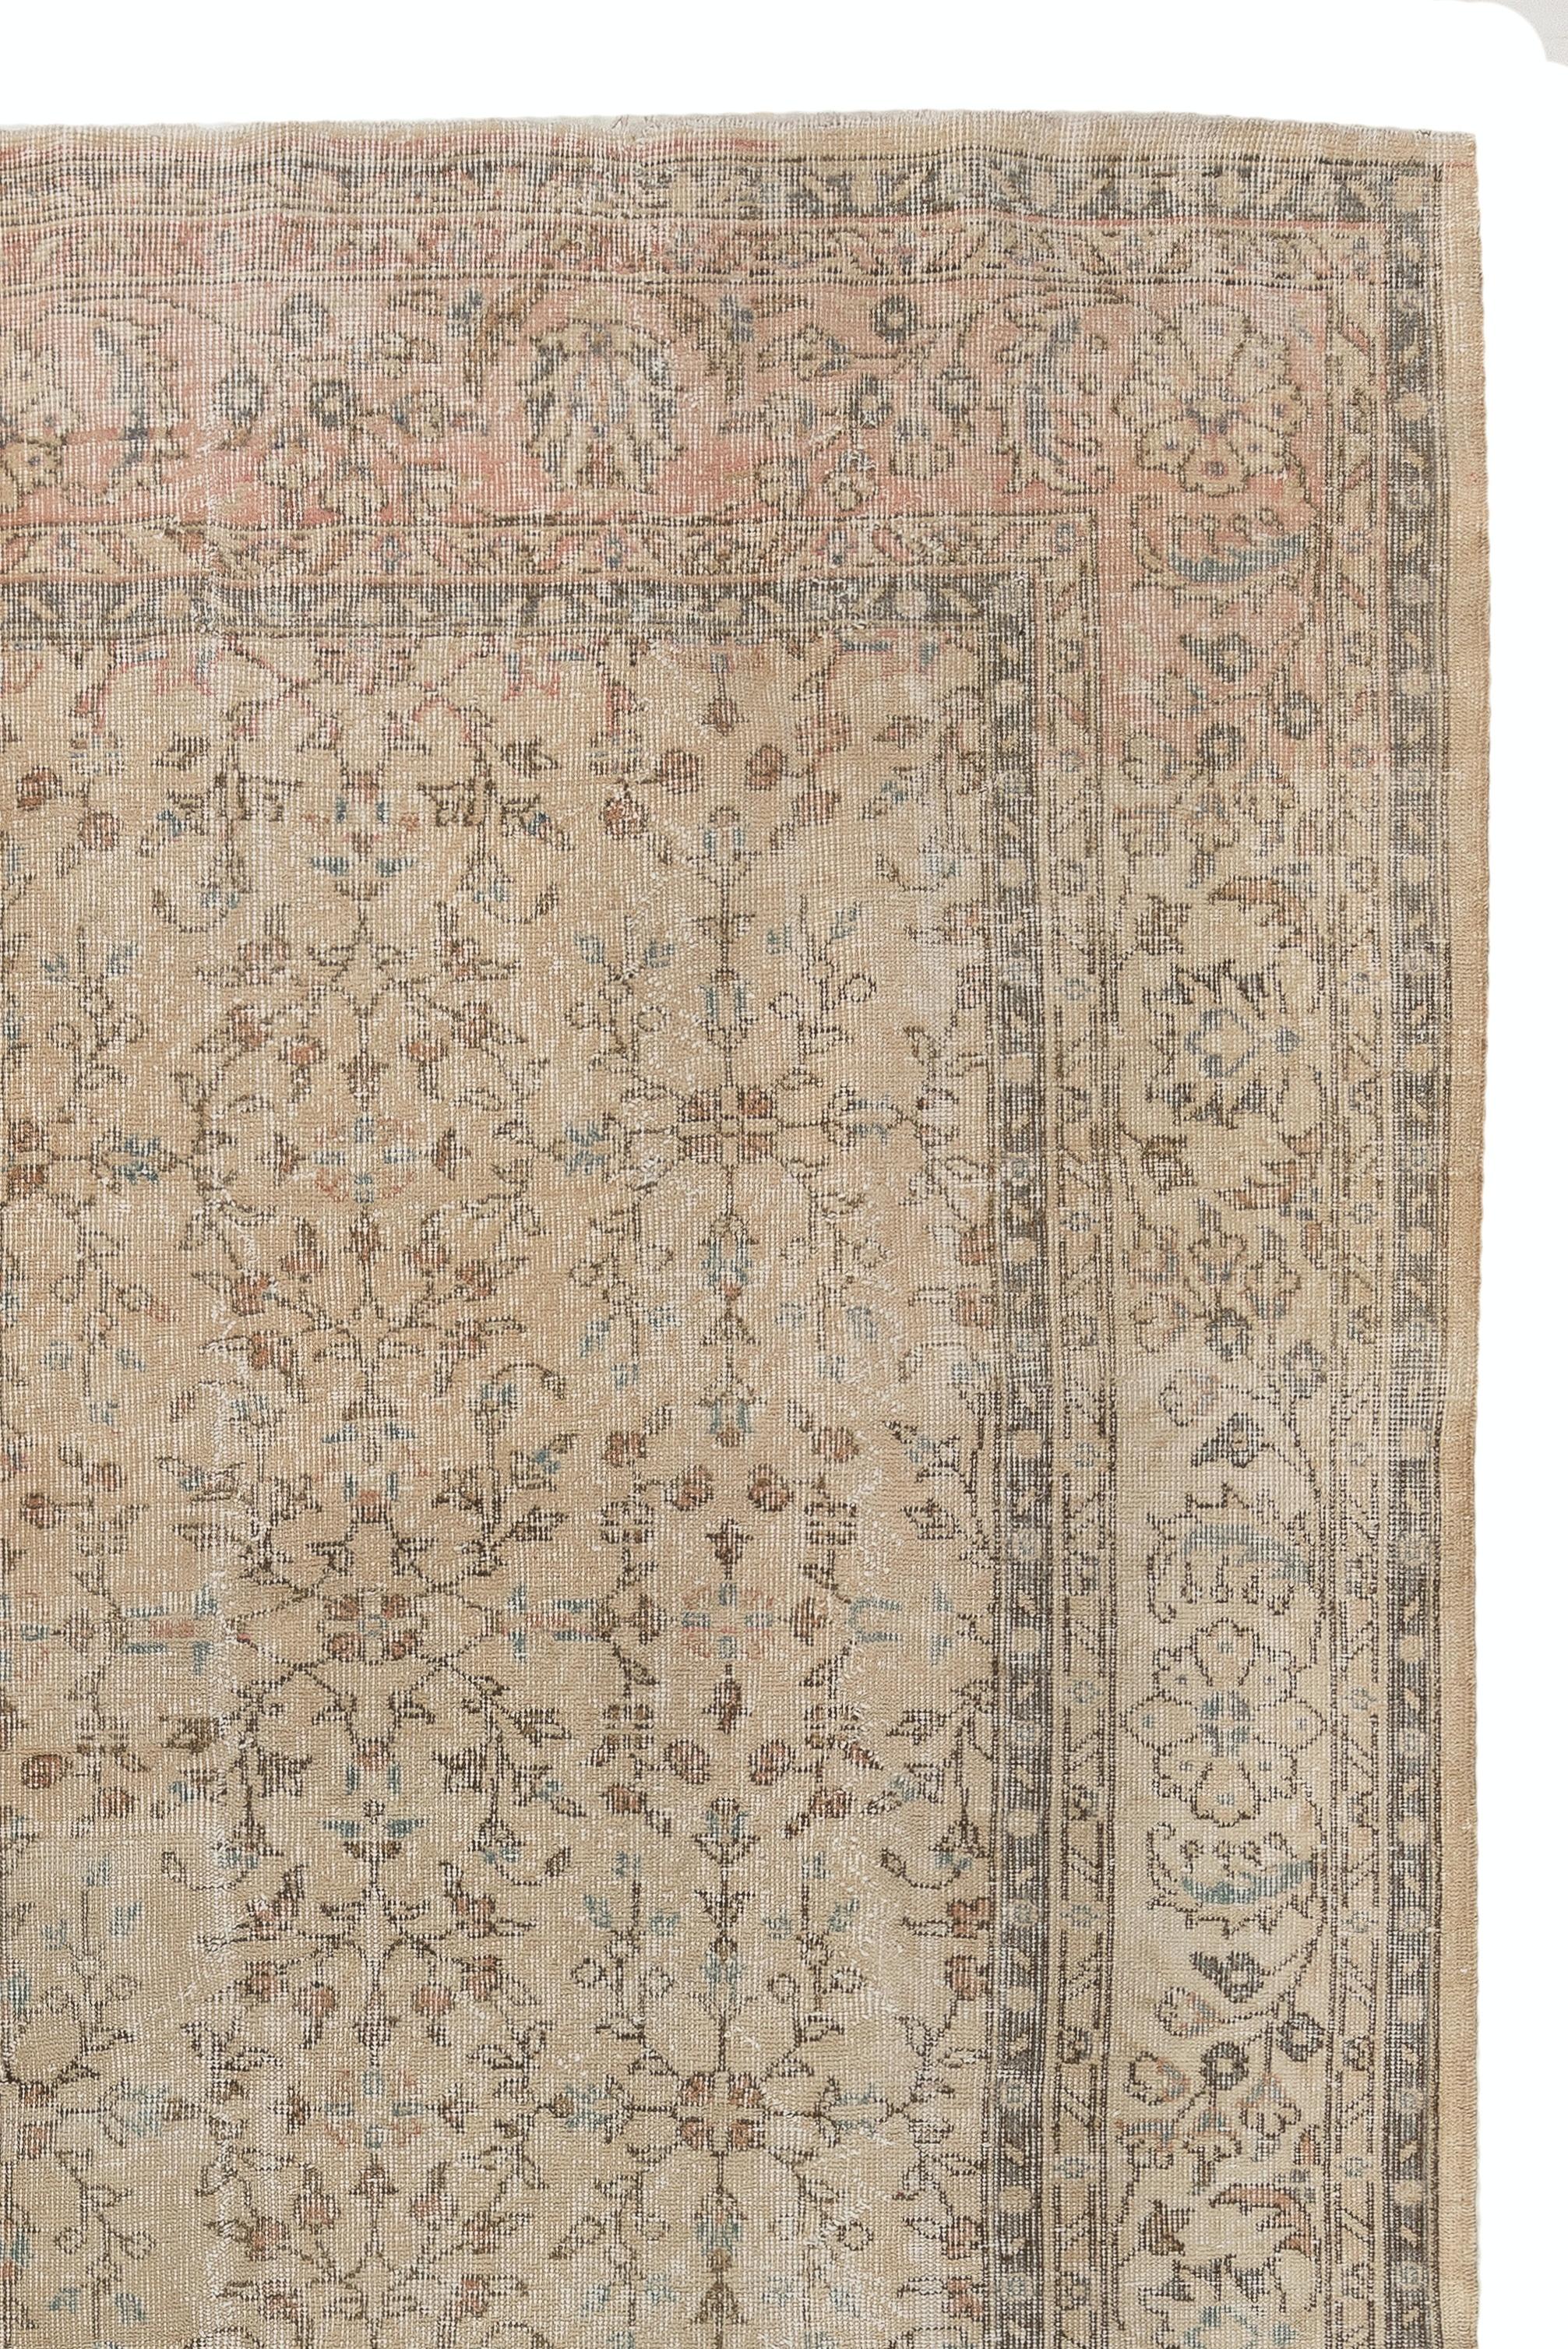 Oushak 7.4x10.4 Ft Handmade Vintage Floral Turkish Area Rug in Muted, Earthy Colors. 